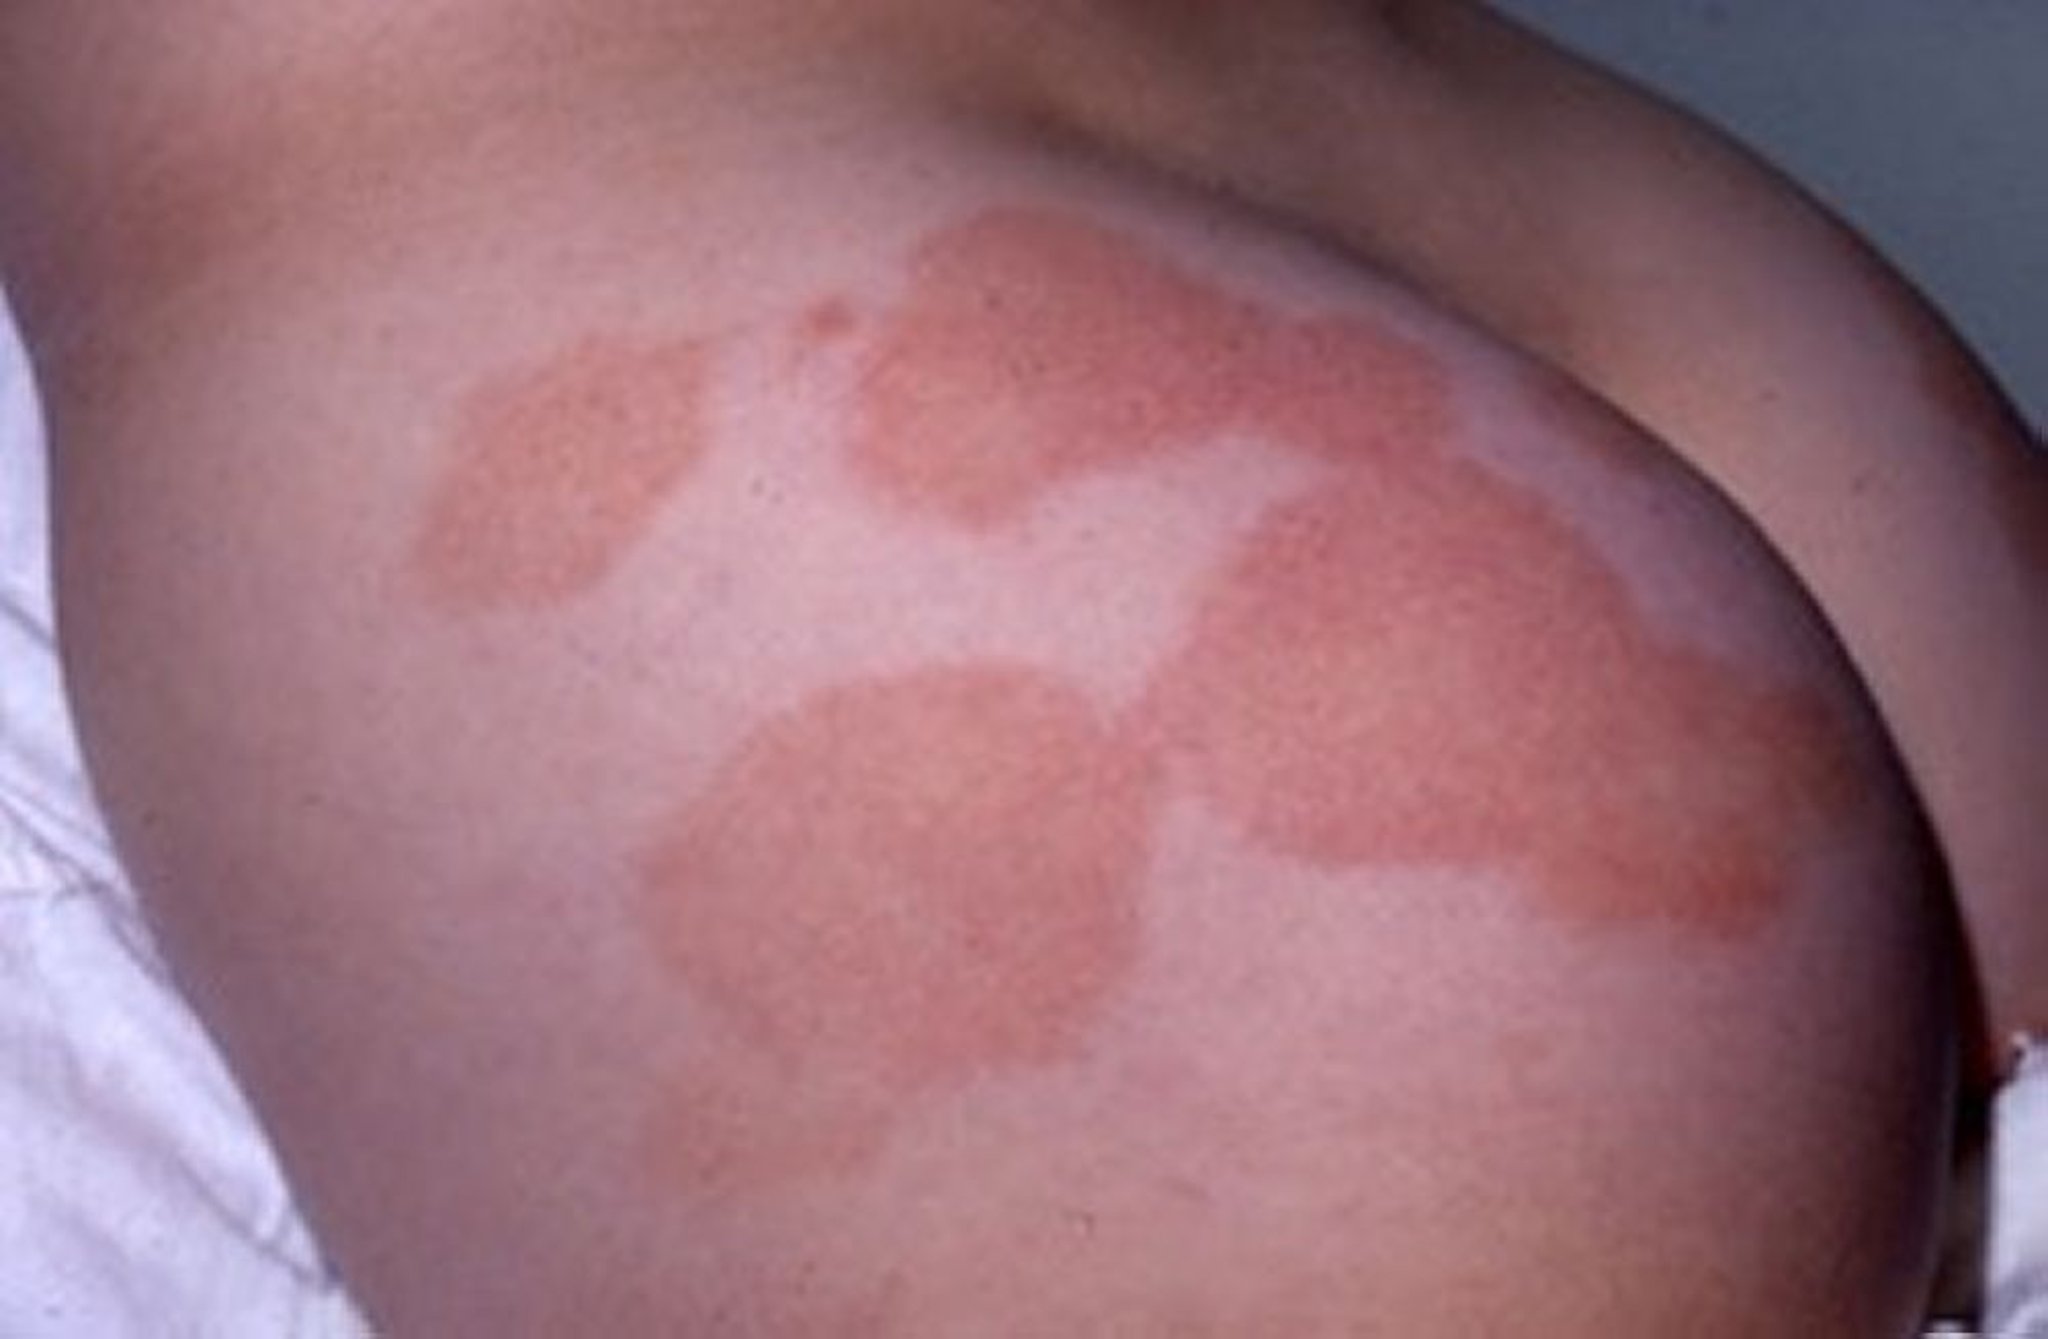 Large-Plaque Parapsoriasis on the Buttocks